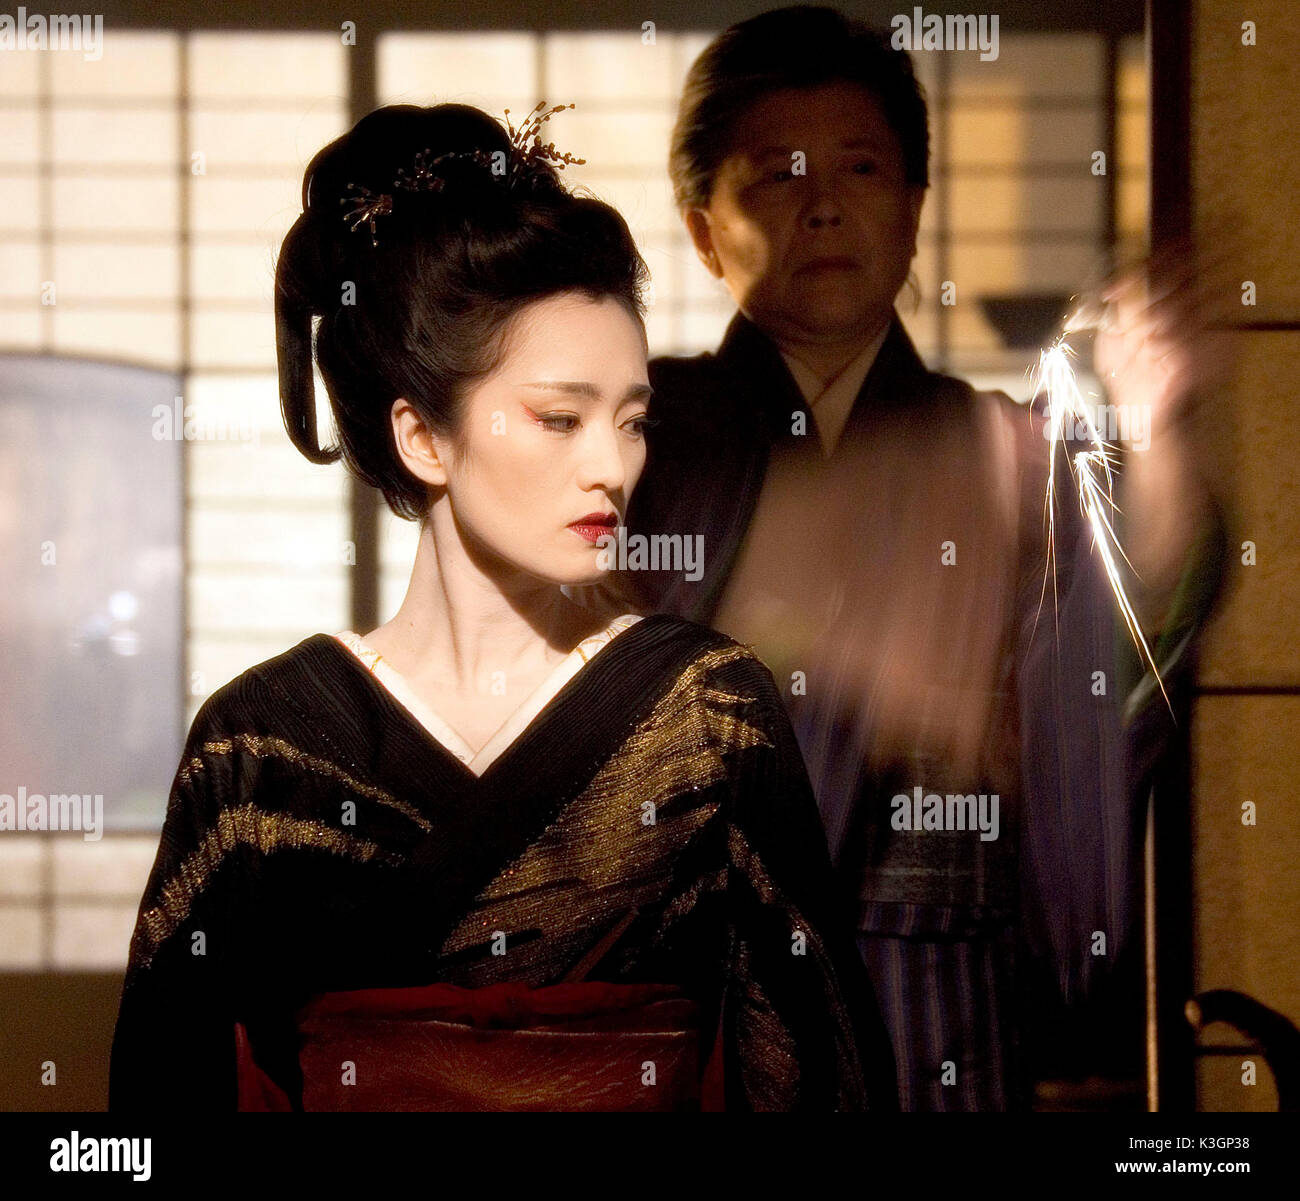 MEMOIRS OF A GEISHA stars Ziyi Zhang, Gong Li, Michelle Yeoh, and Ken Watanabe and is directed by Rob Marshall. **ALL IMAGES ARE PROPERTY OF SONY PICTURES ENTERTAINMENT INC. FOR PROMOTIONAL USE ONLY. SALE, DUPLICATION OR TRANSFER OF THIS MATERIAL IS STRICTLY PROHIBITED. Distributed by Buena Vista International. MEMOIRS OF A GEISHA Gong Li     Date: 2005 Stock Photo